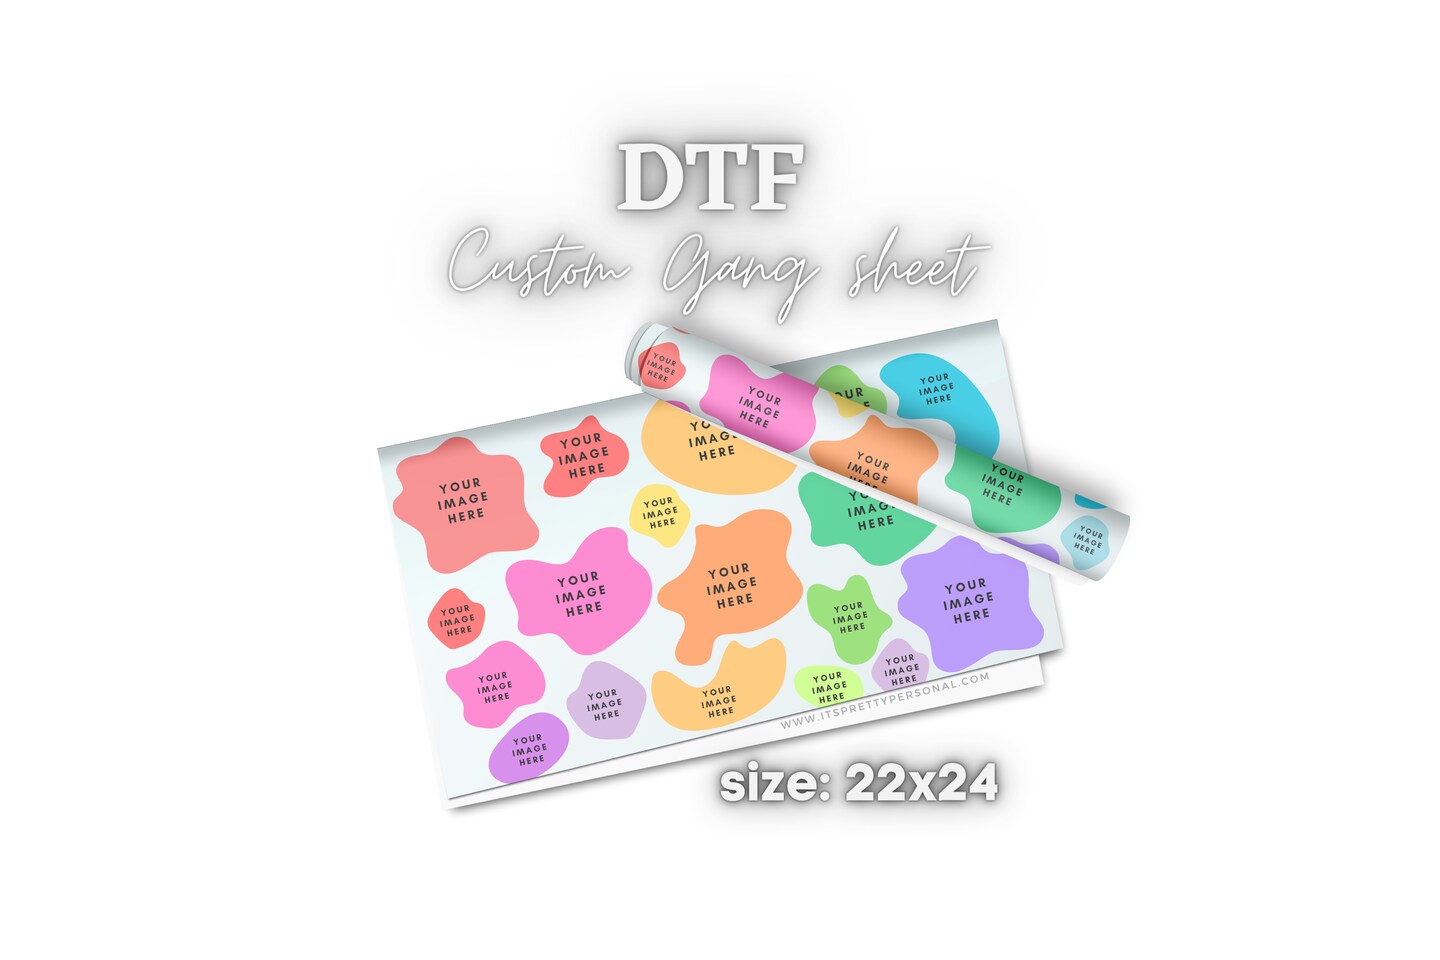 22&#x22;x24&#x22; Custom DTF Gang Sheet- Design Your Own! (Fabric DTF prints, NOT UV Decal)